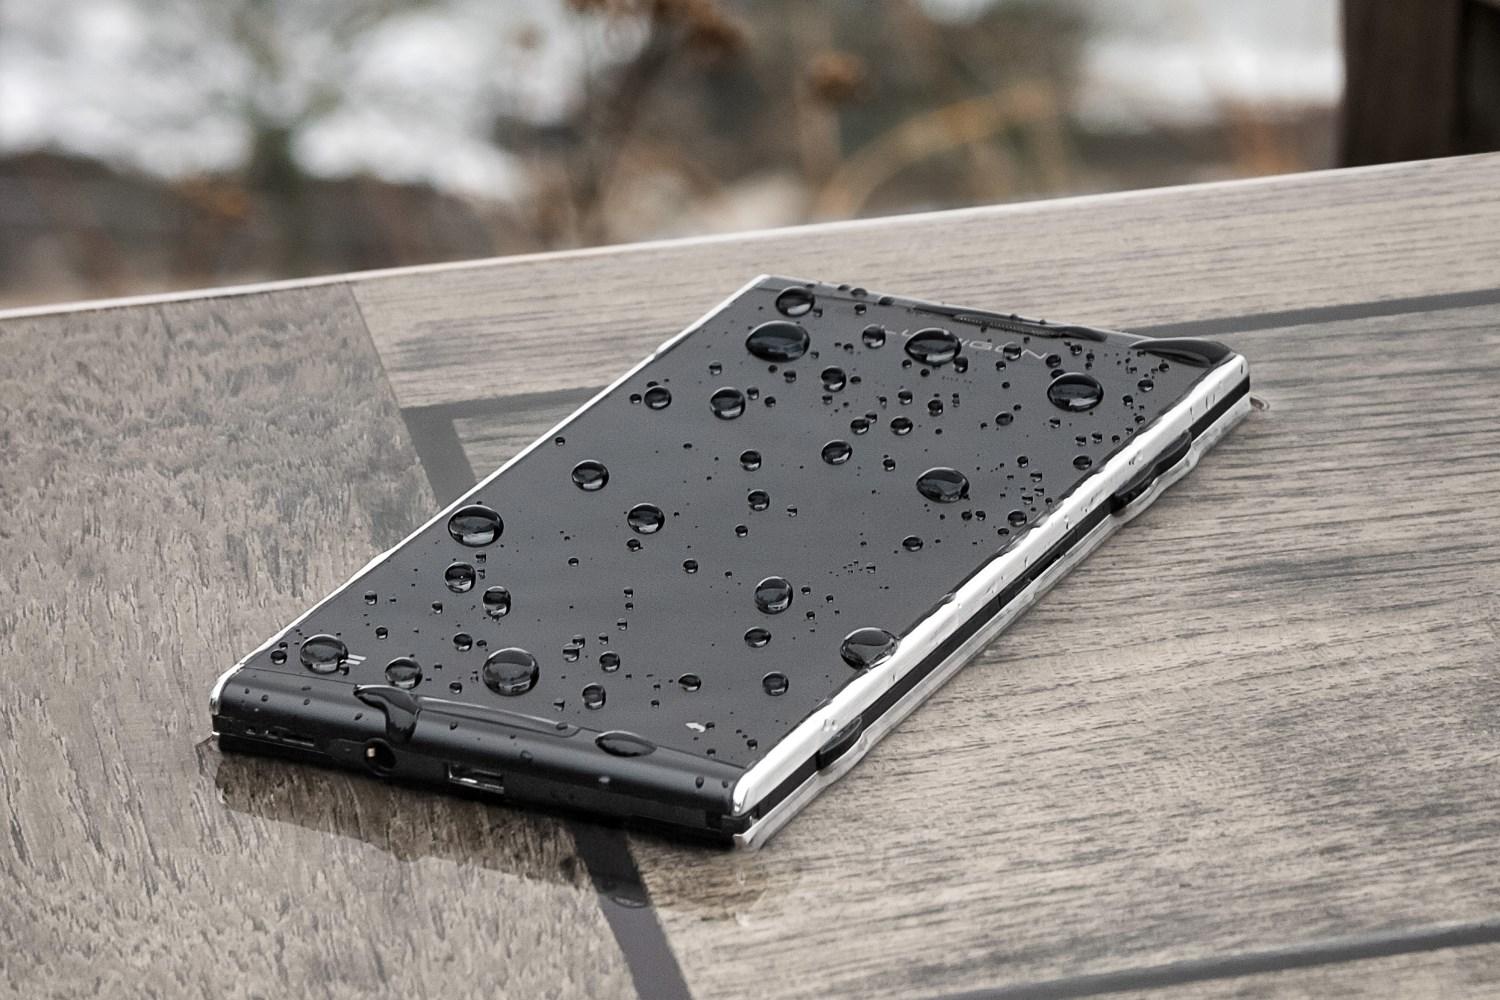 The Lumigon T2 HD Android phone features a front-facing flash and is water-resistant. (Lumigon)